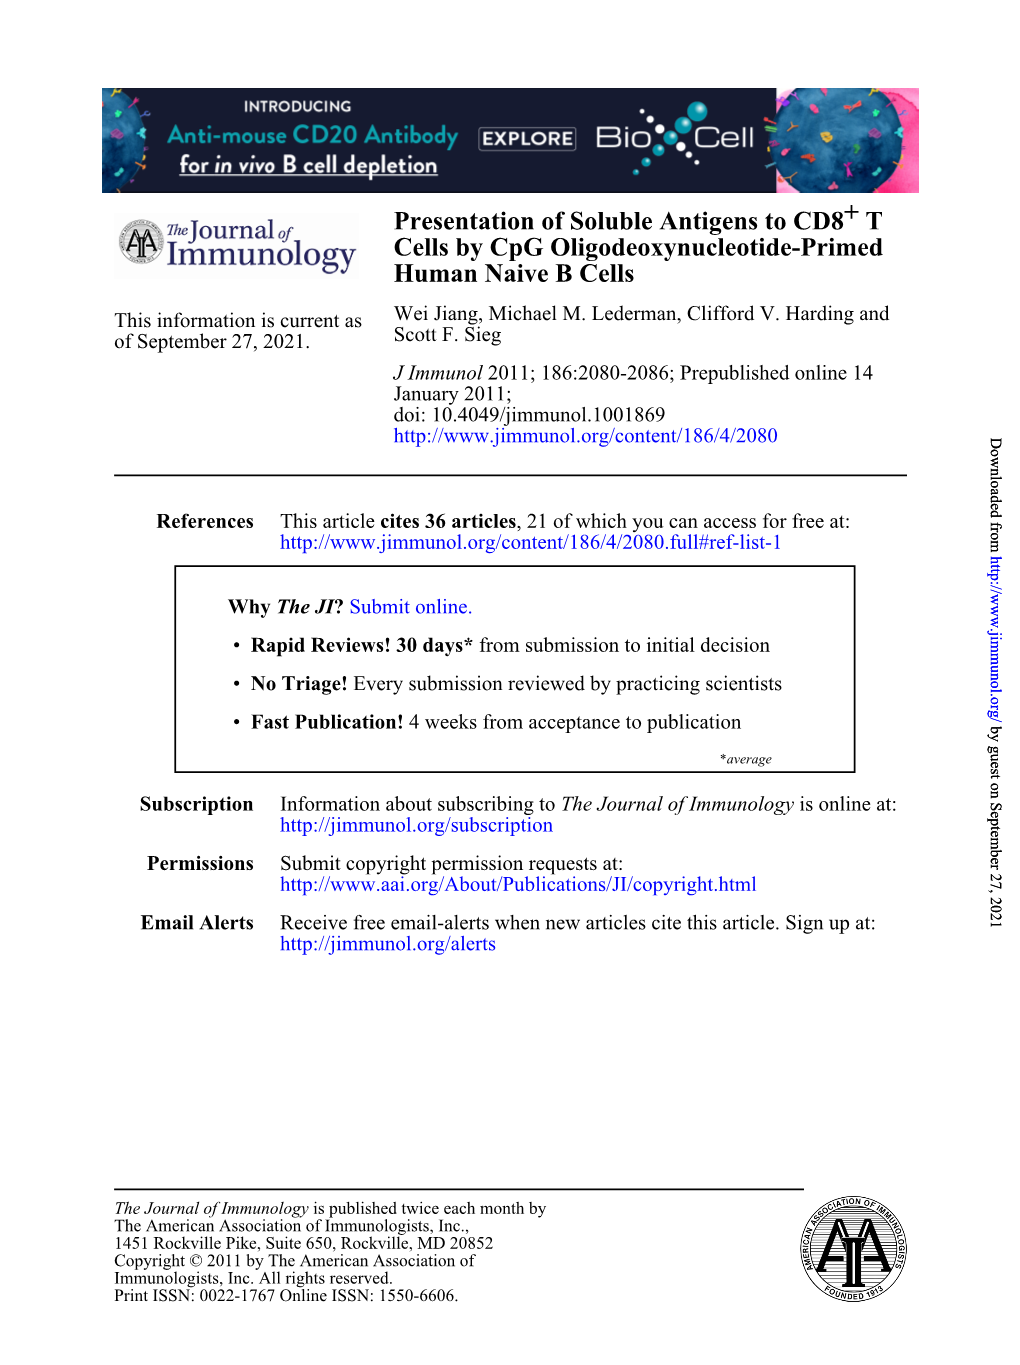 Human Naive B Cells Cells by Cpg Oligodeoxynucleotide-Primed T+